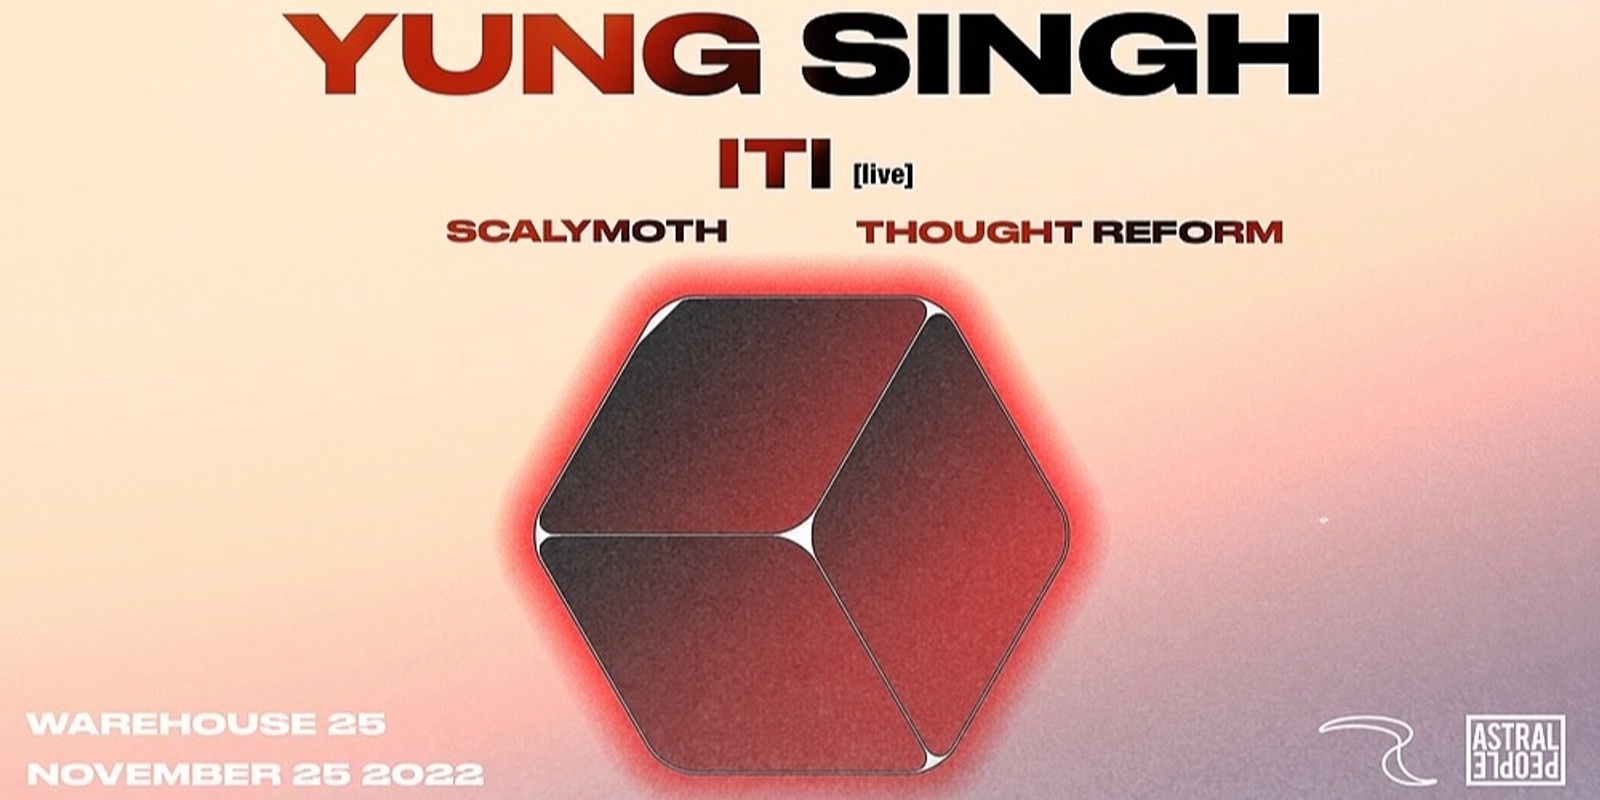 Banner image for Pocketmoth Presents Yung Singh, ft. Iti [live], Scalymoth, Thought Reform